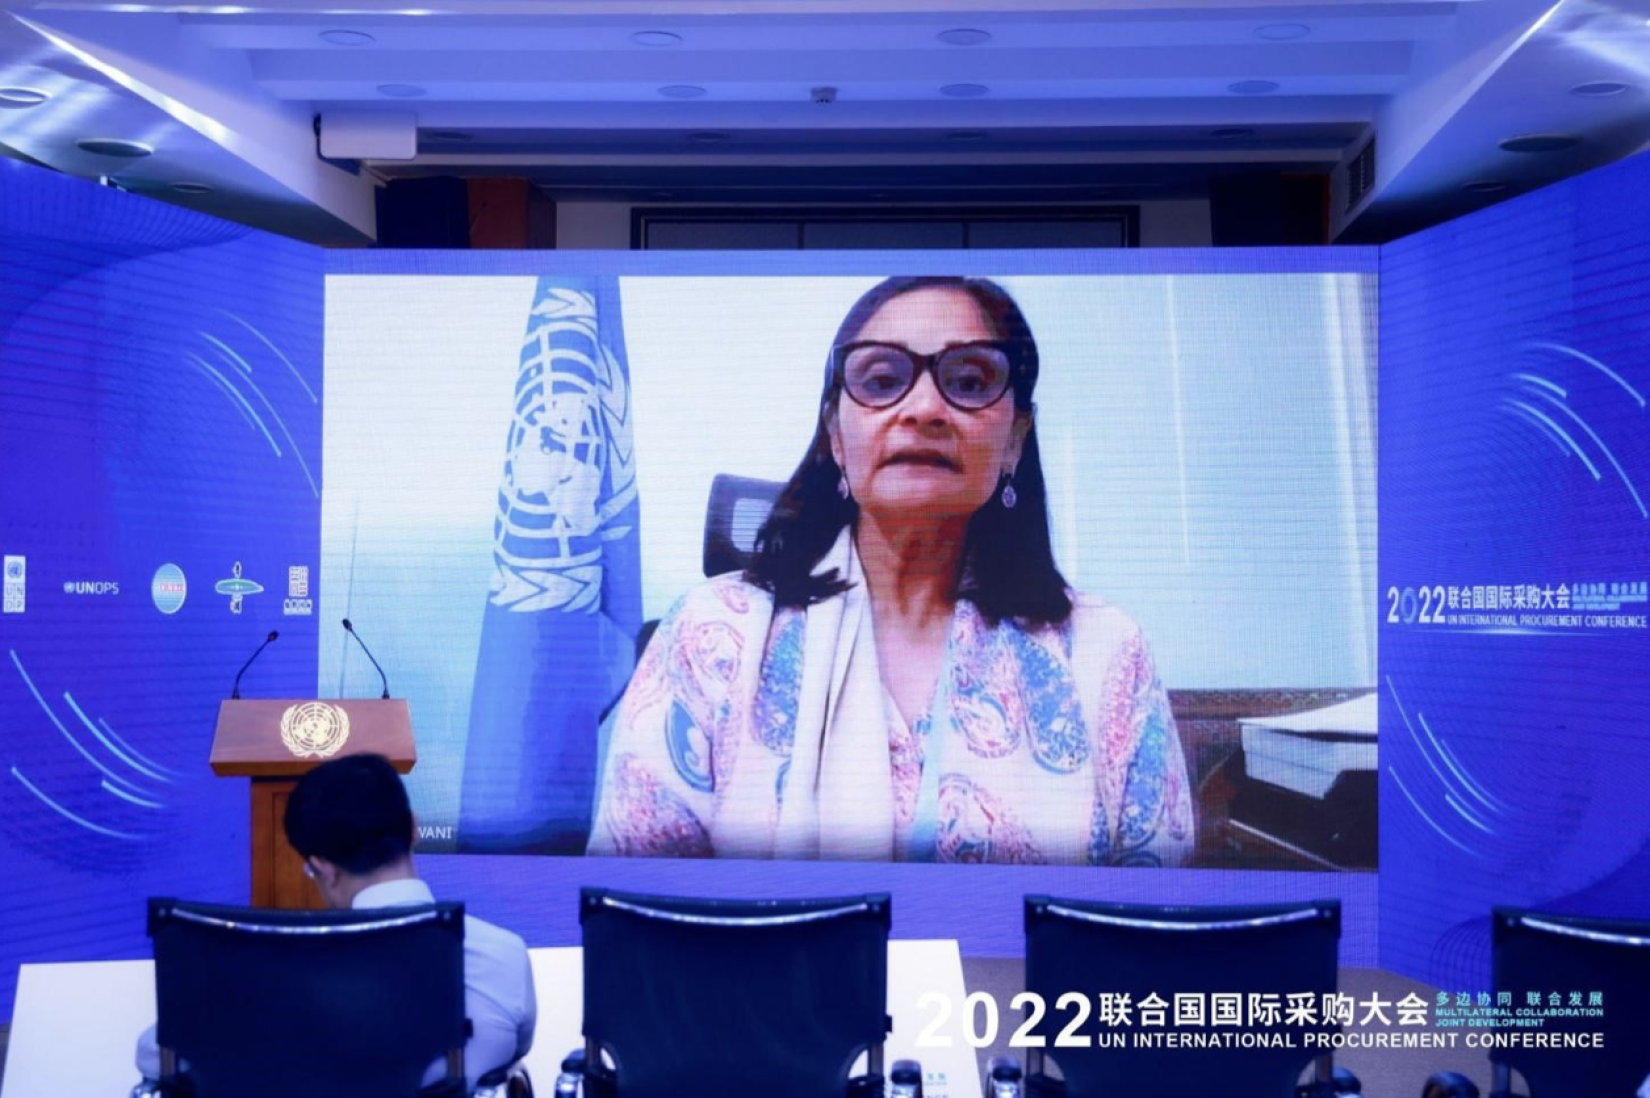 Ms. Samina Kadwani, Director of UNOPS Thailand Multi-Country Office, spoke about the UNDP and UNOPS-led Knowledge Sharing, Capacity Building and Supporting Service Programme on Sustainable Procurement of UN/International Organisations 